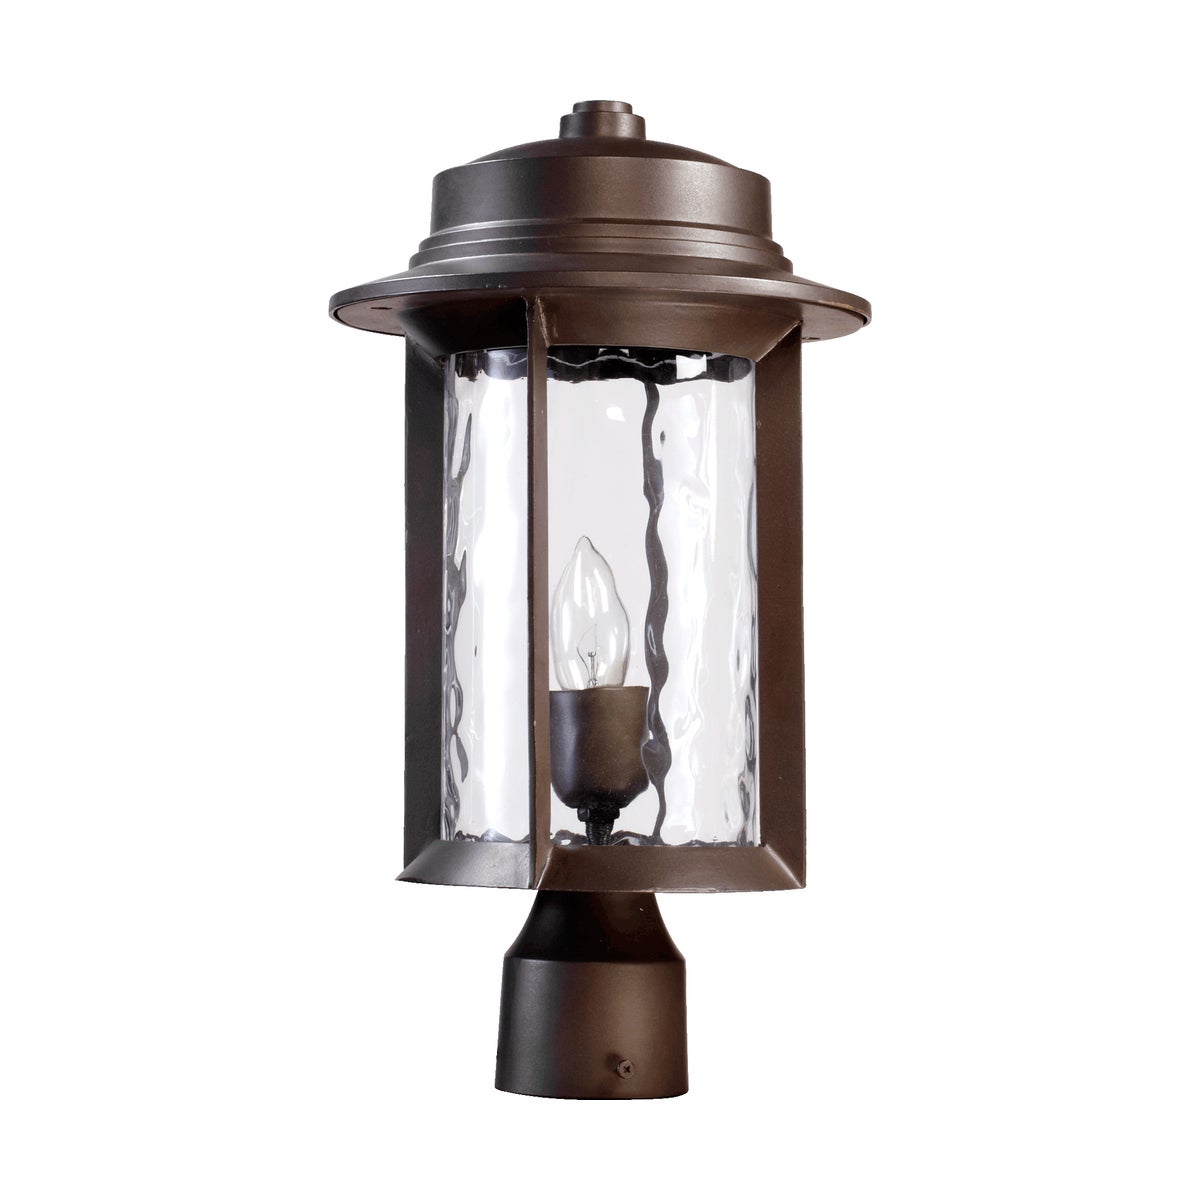 Charter Oiled Bronze Transitional Outdoor Post Light